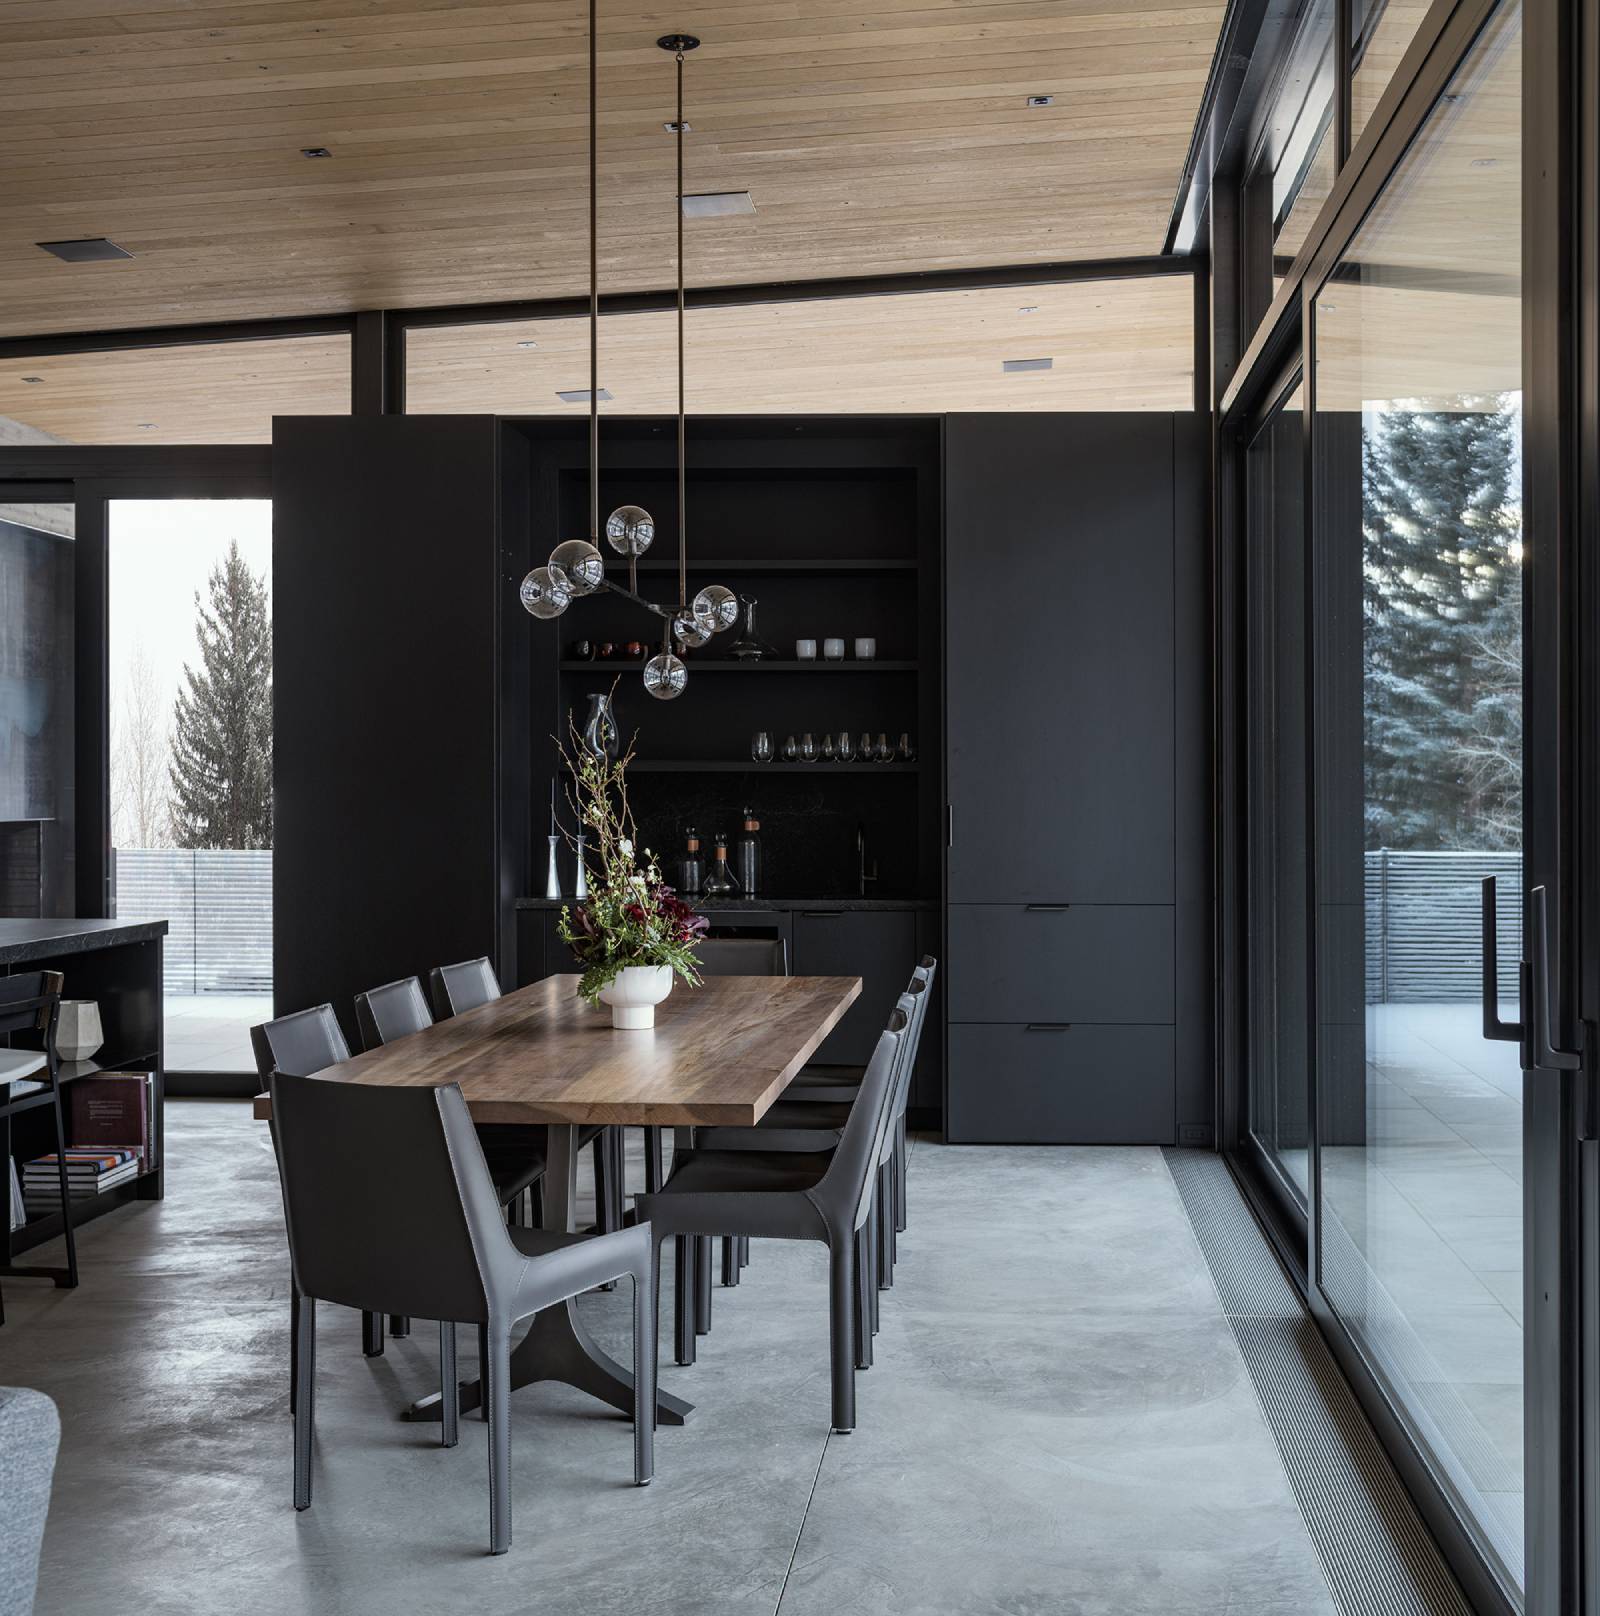 Interior view of the dining room at Avalanche Chalet, a custom home designed and built by Farmer Payne Architects.